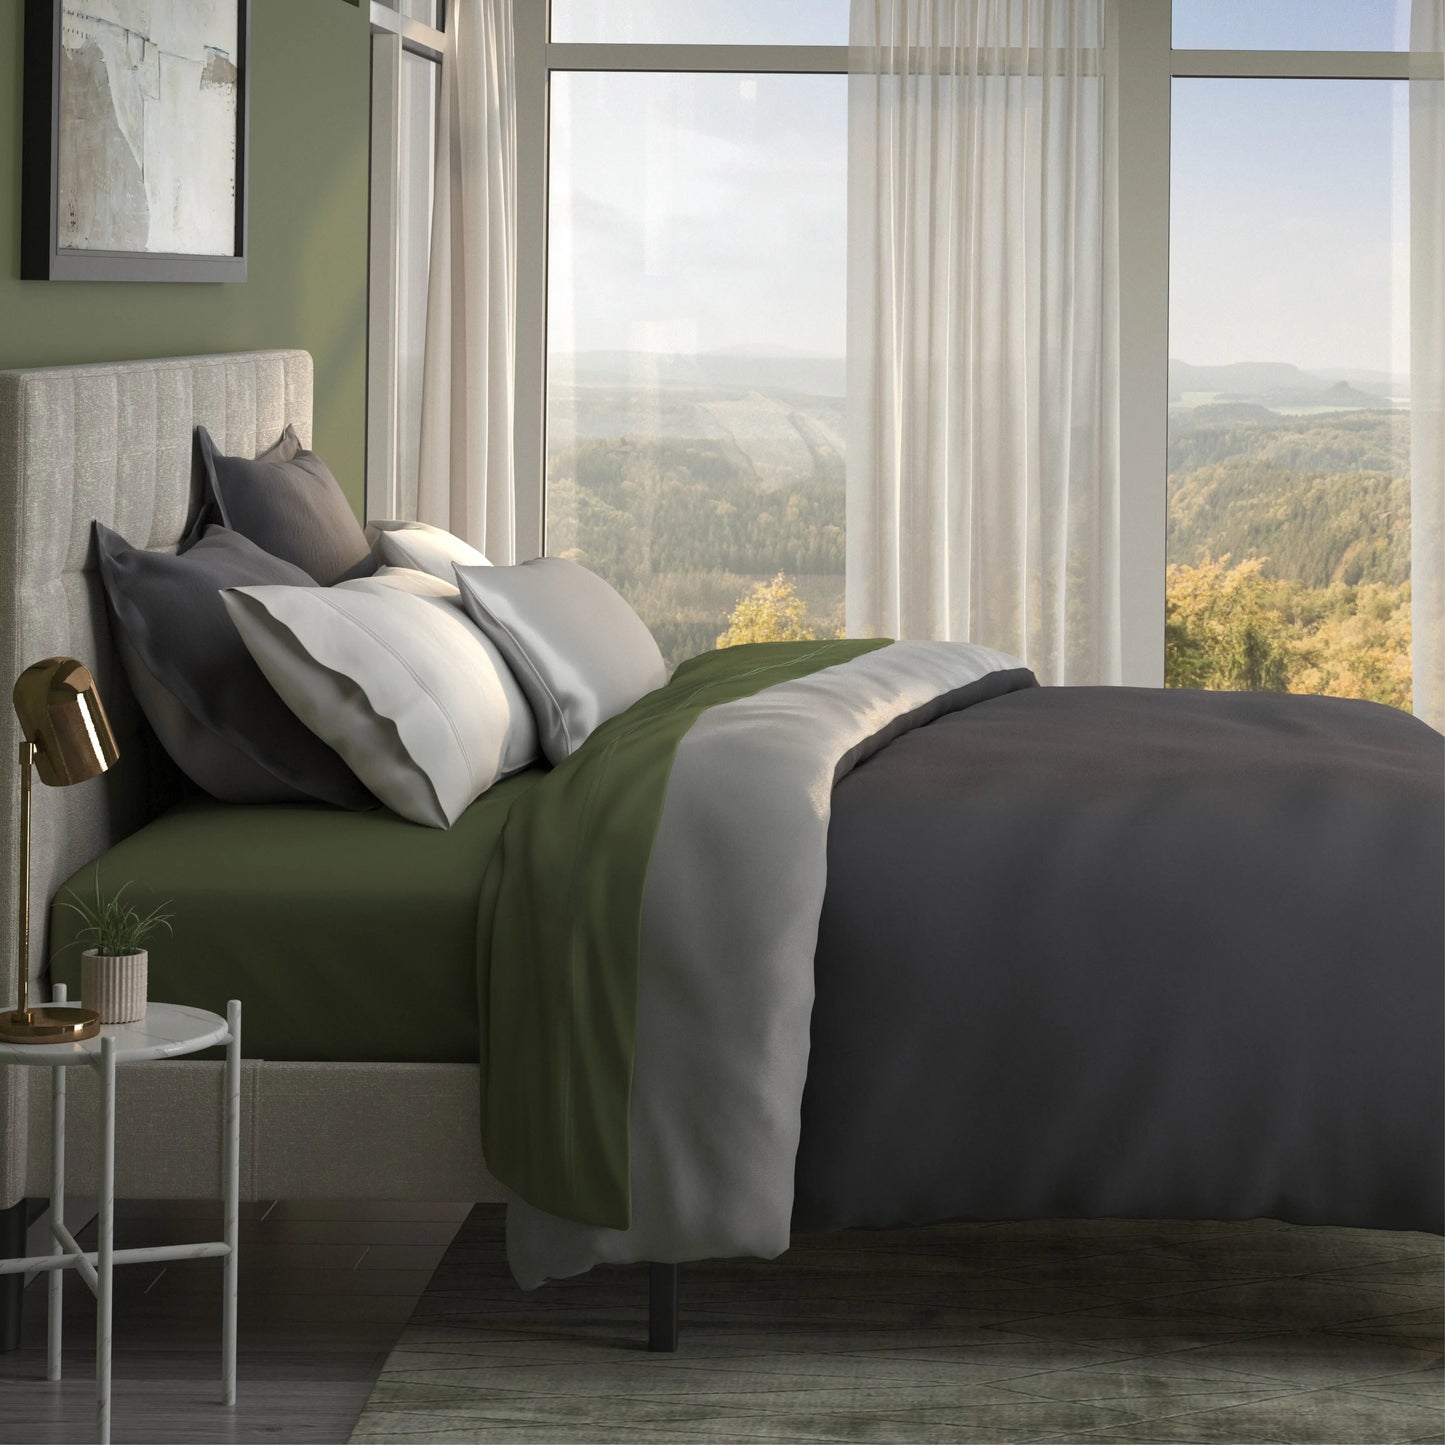 Duvet Cover + Soft Touch/Bamboo PureCare